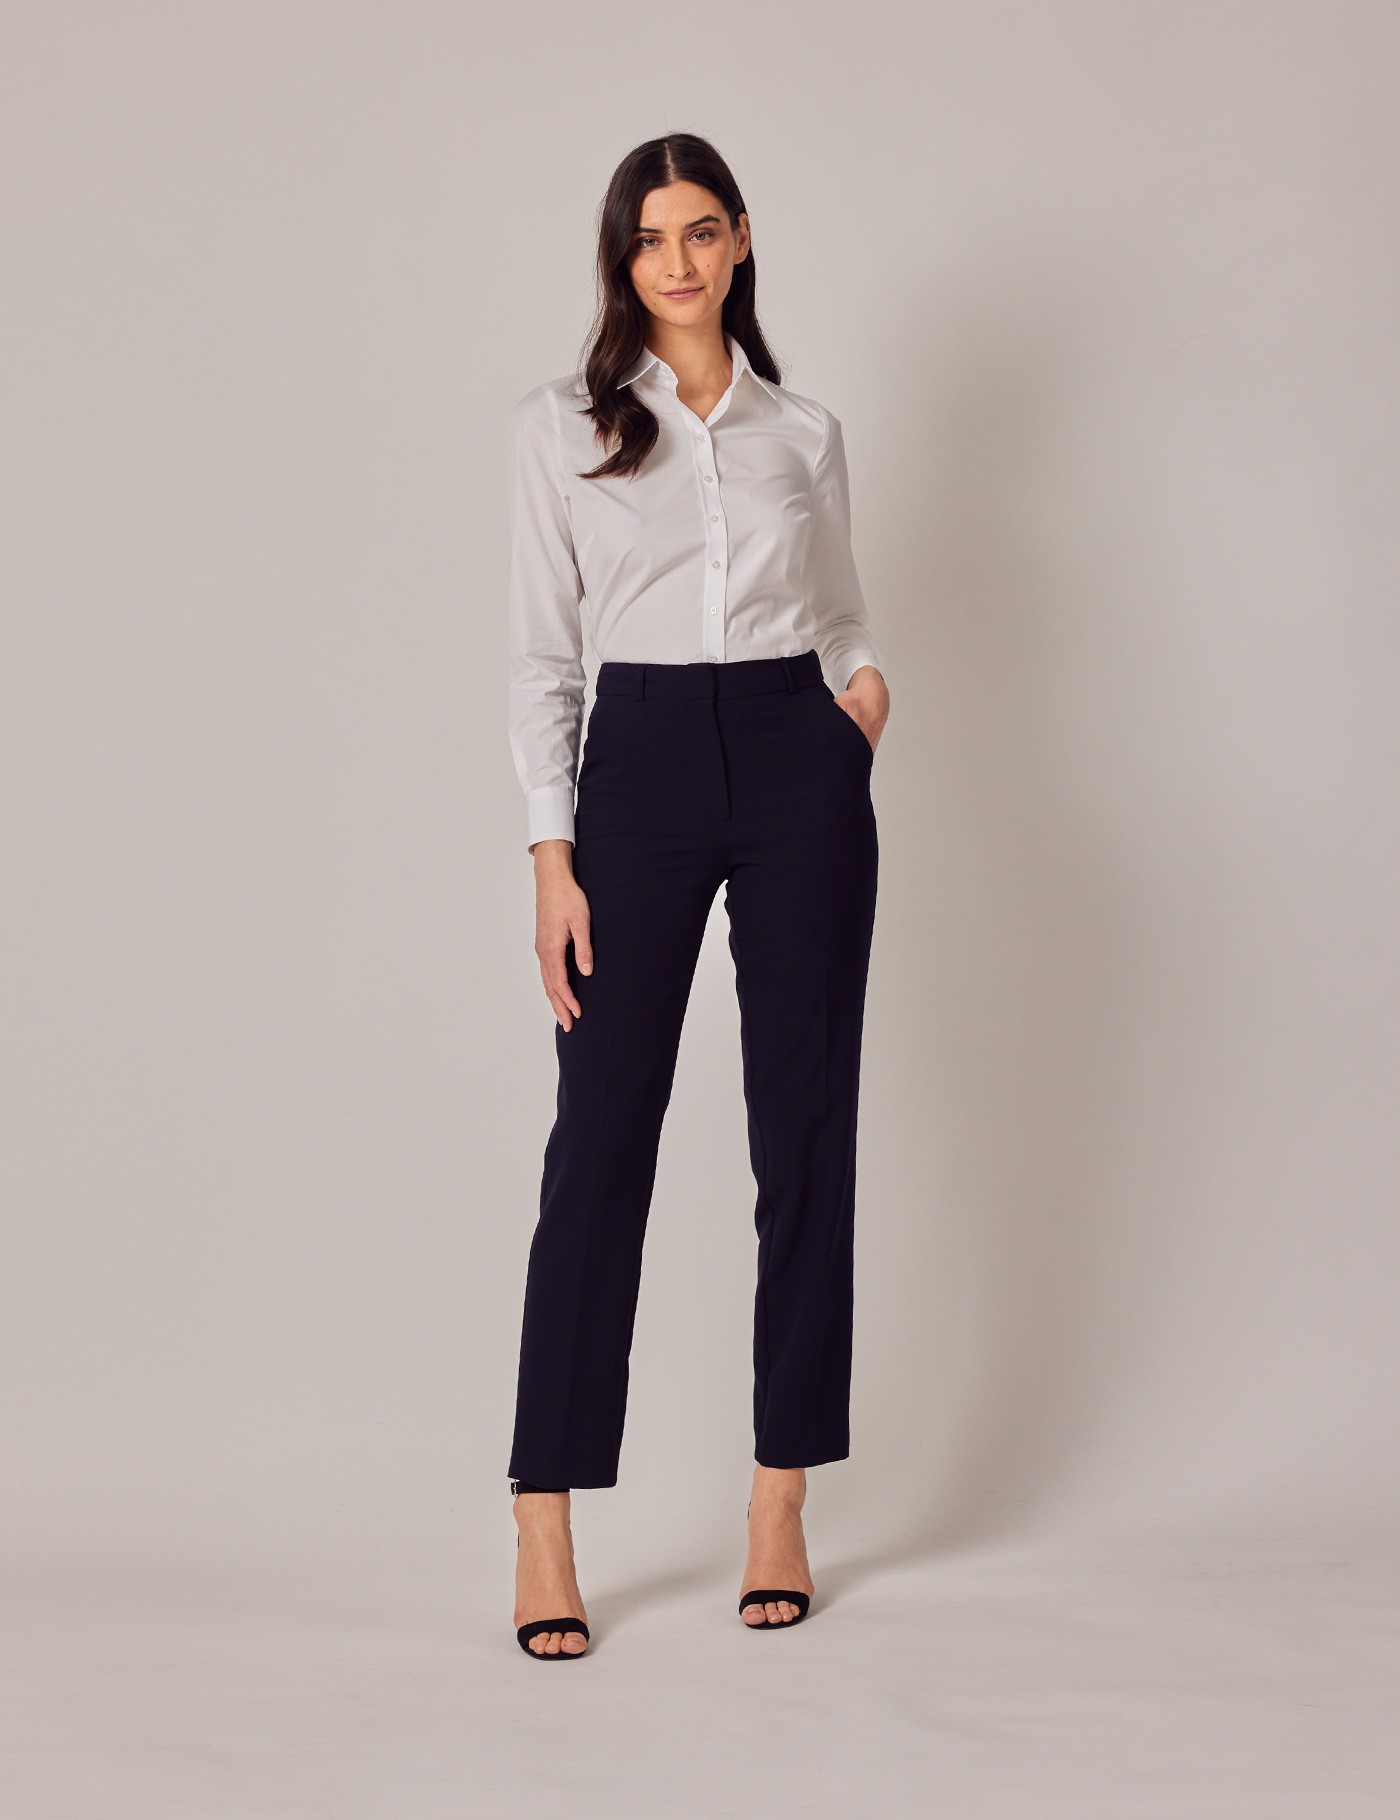 5 Things to Look for In High Quality Women's Dress Pants - Styled by Science